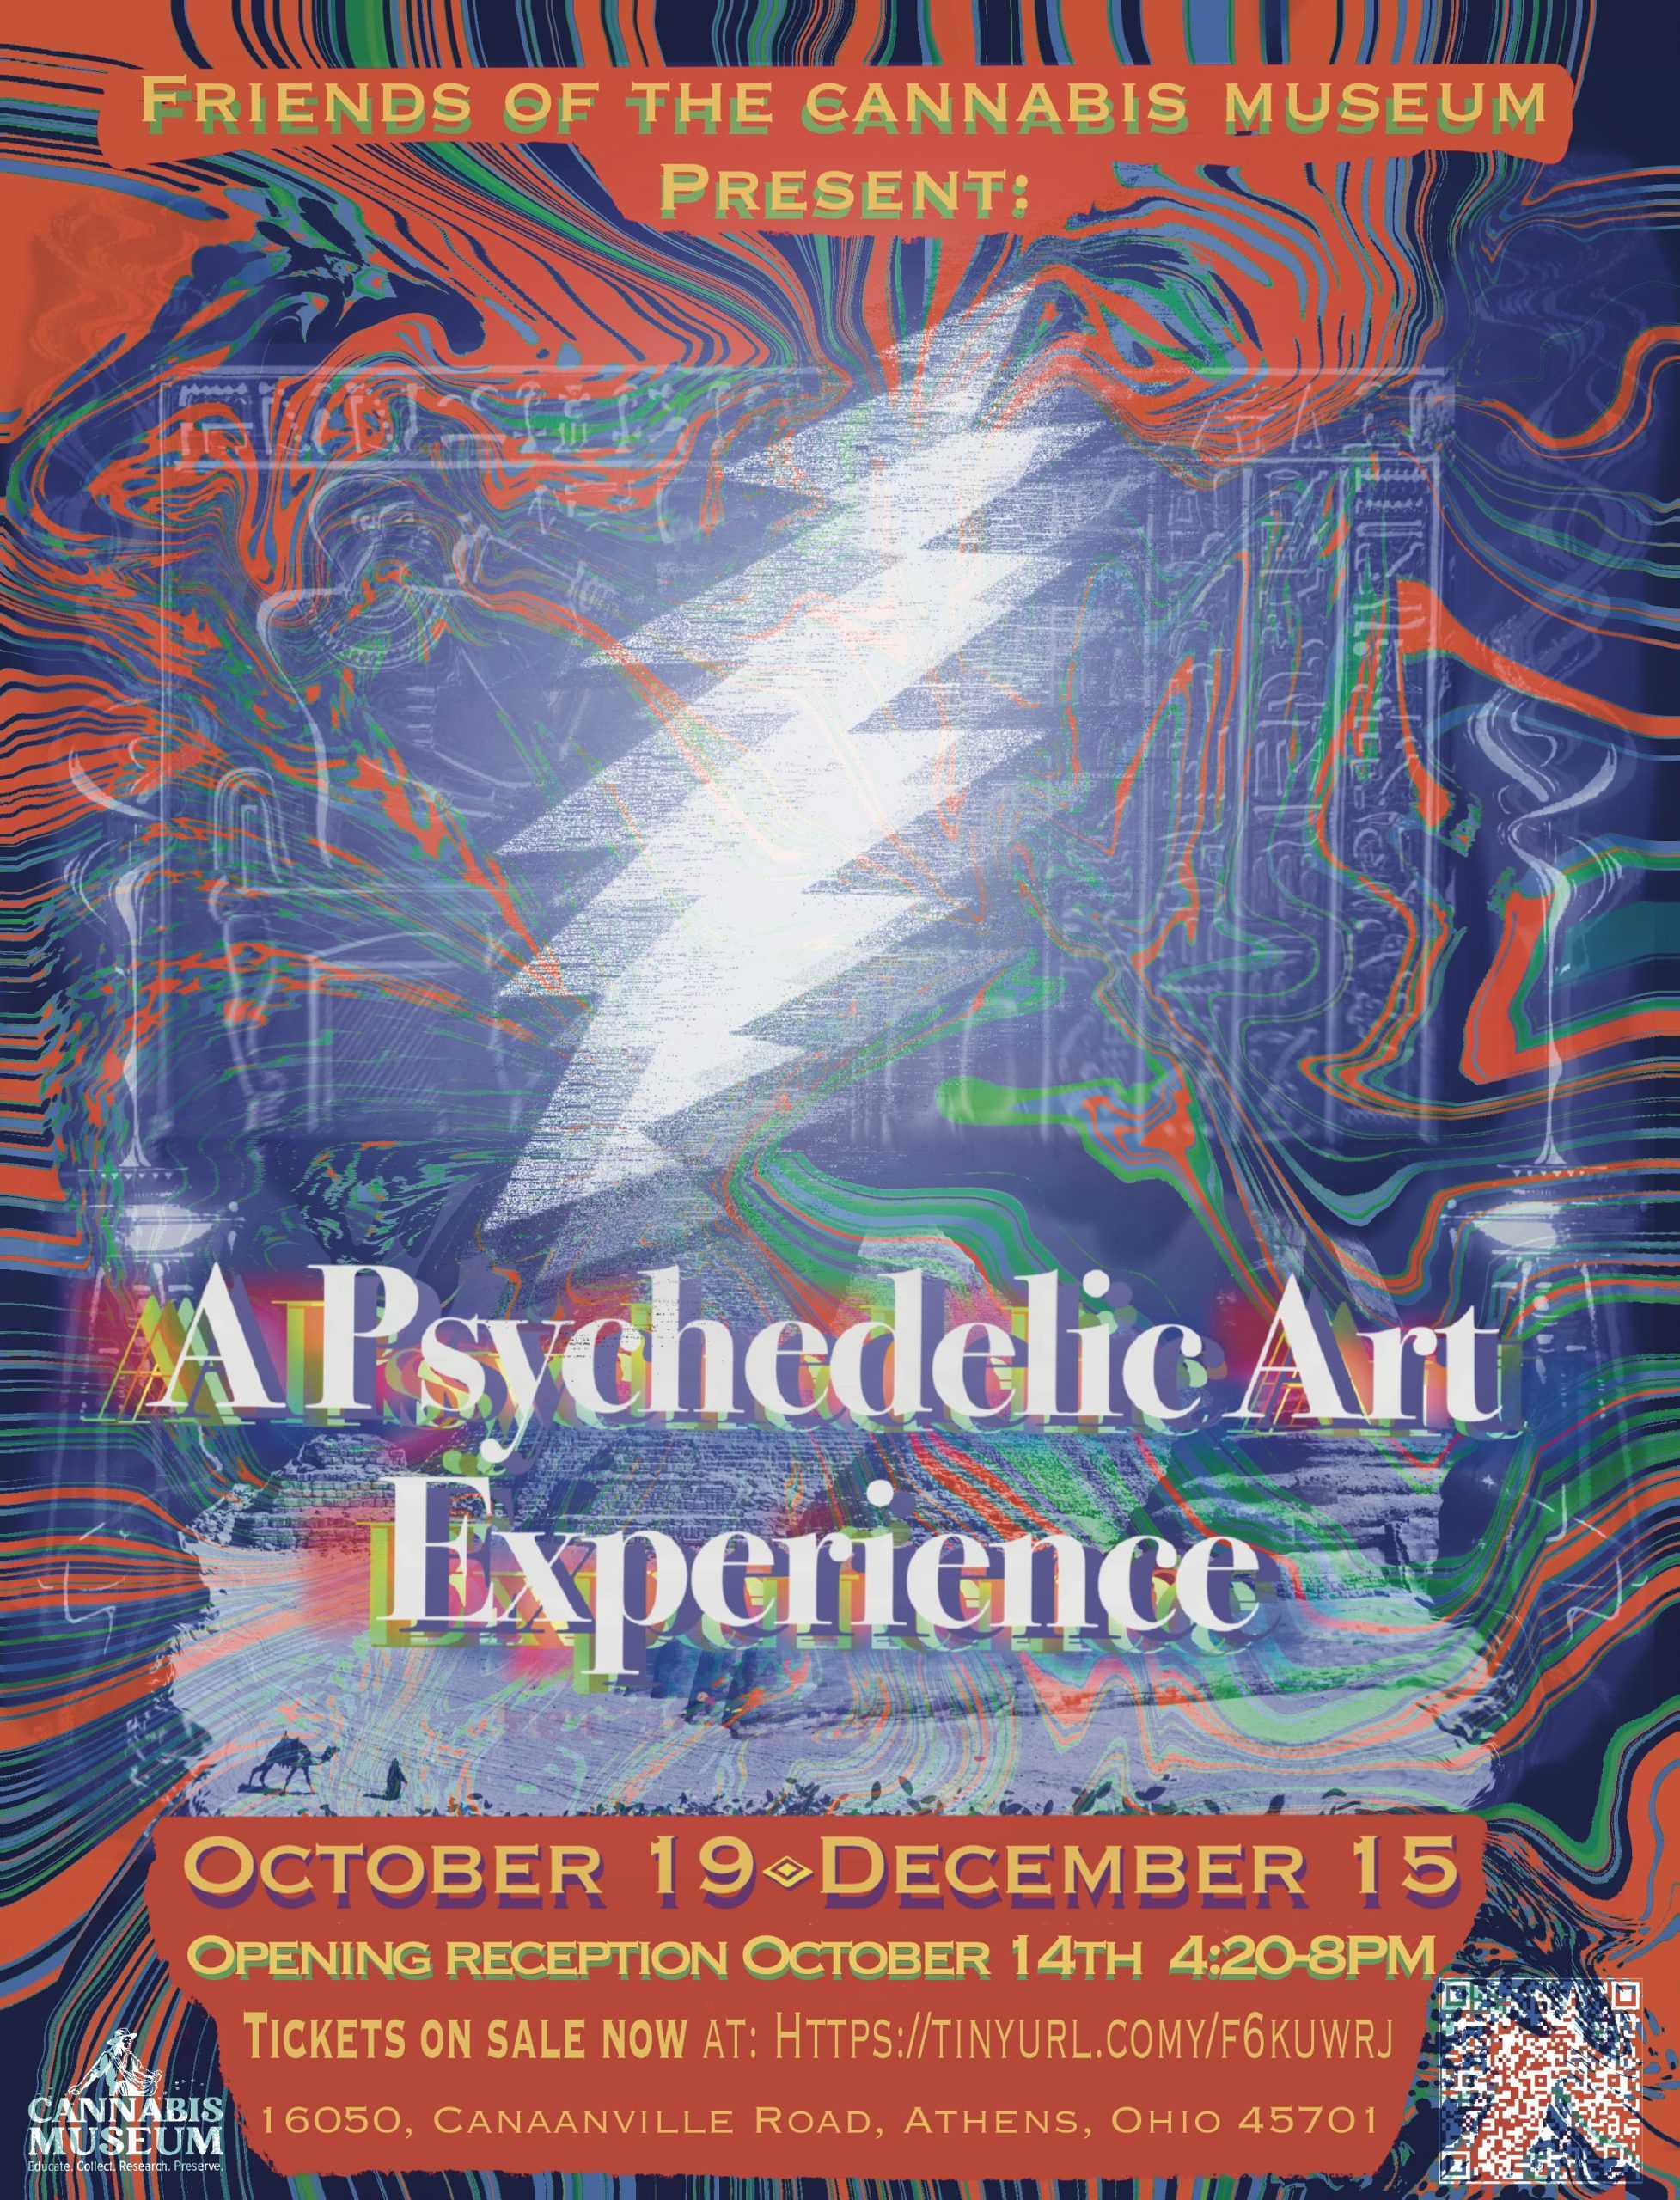 A flyer reading: Friends of the Cannabis Museum Present: A Psychedelic Art Experience October 19 through December 15 Opening reception October 14 at 4:20-8pm Tickets on sale now at https://tinyurl.comy/f6kuwrj 16050 Canaanville Road, Athens, OH 45701